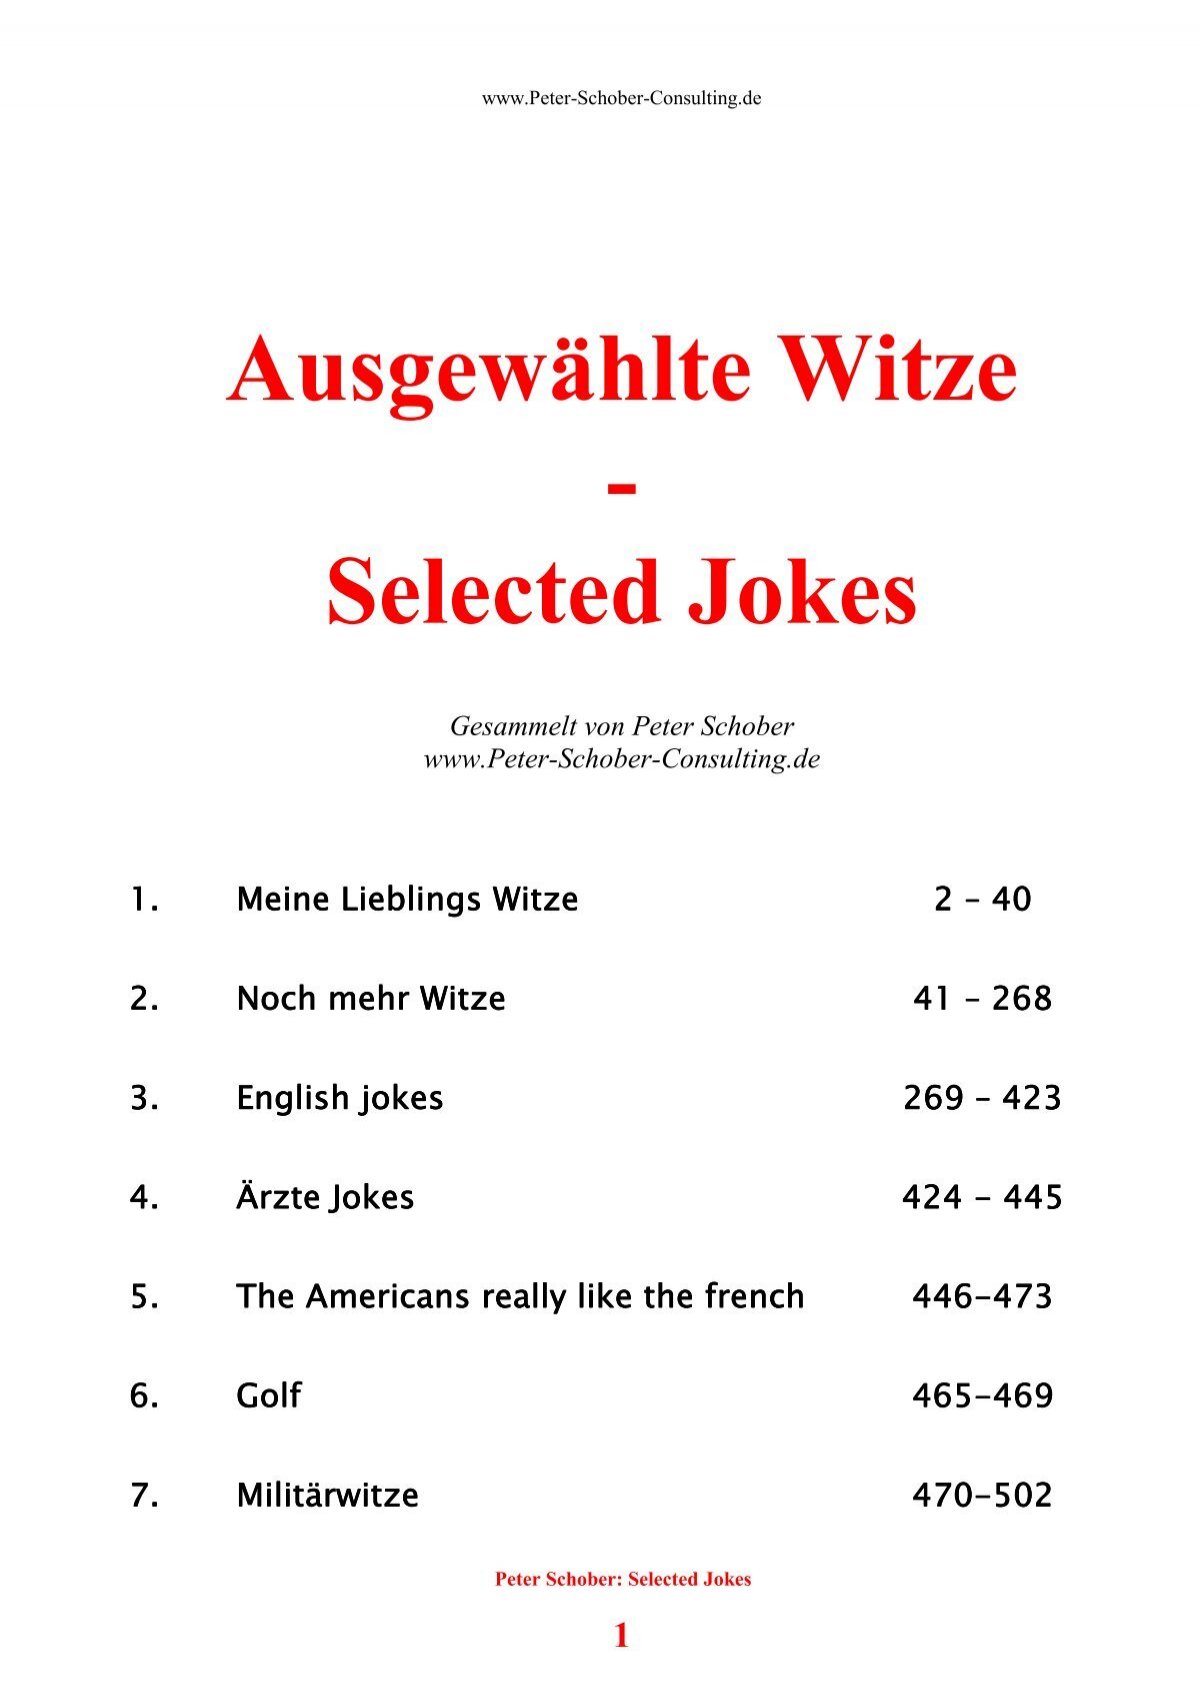 Jokes Selected home Consulting.html Witze - - - Ausgewählte